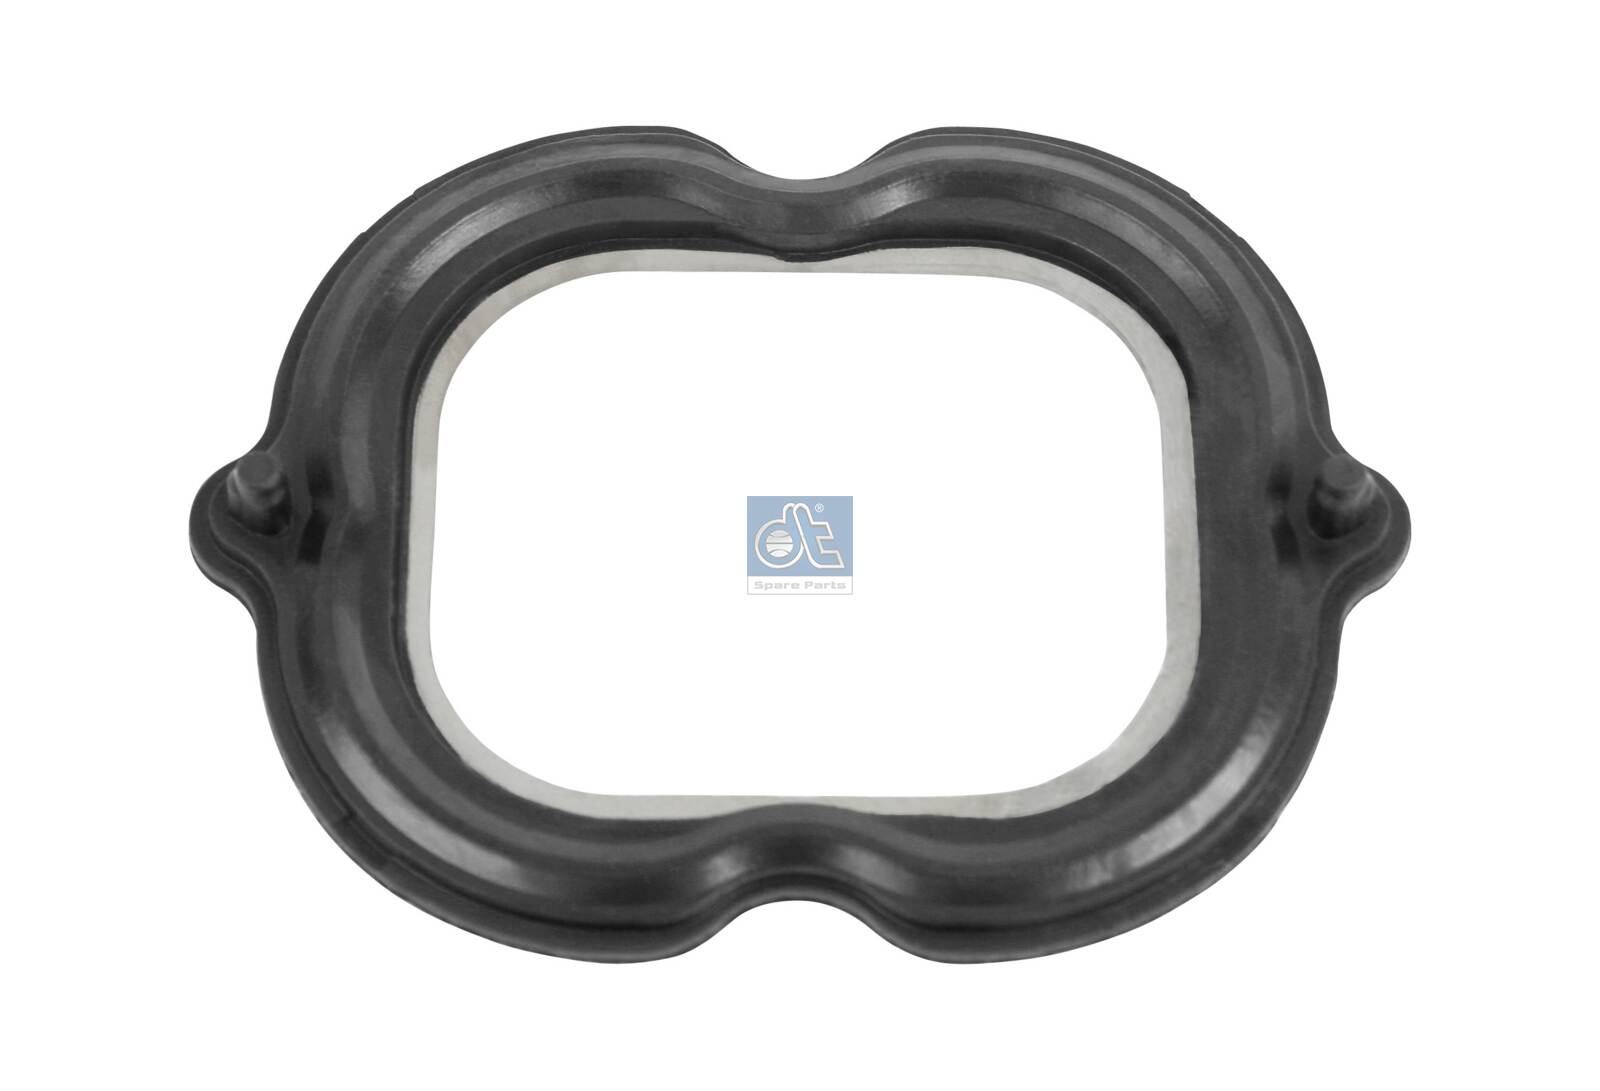 Gasket, intake manifold - 4.20495 DT Spare Parts - 4570980180, 4571420180, A4570980180